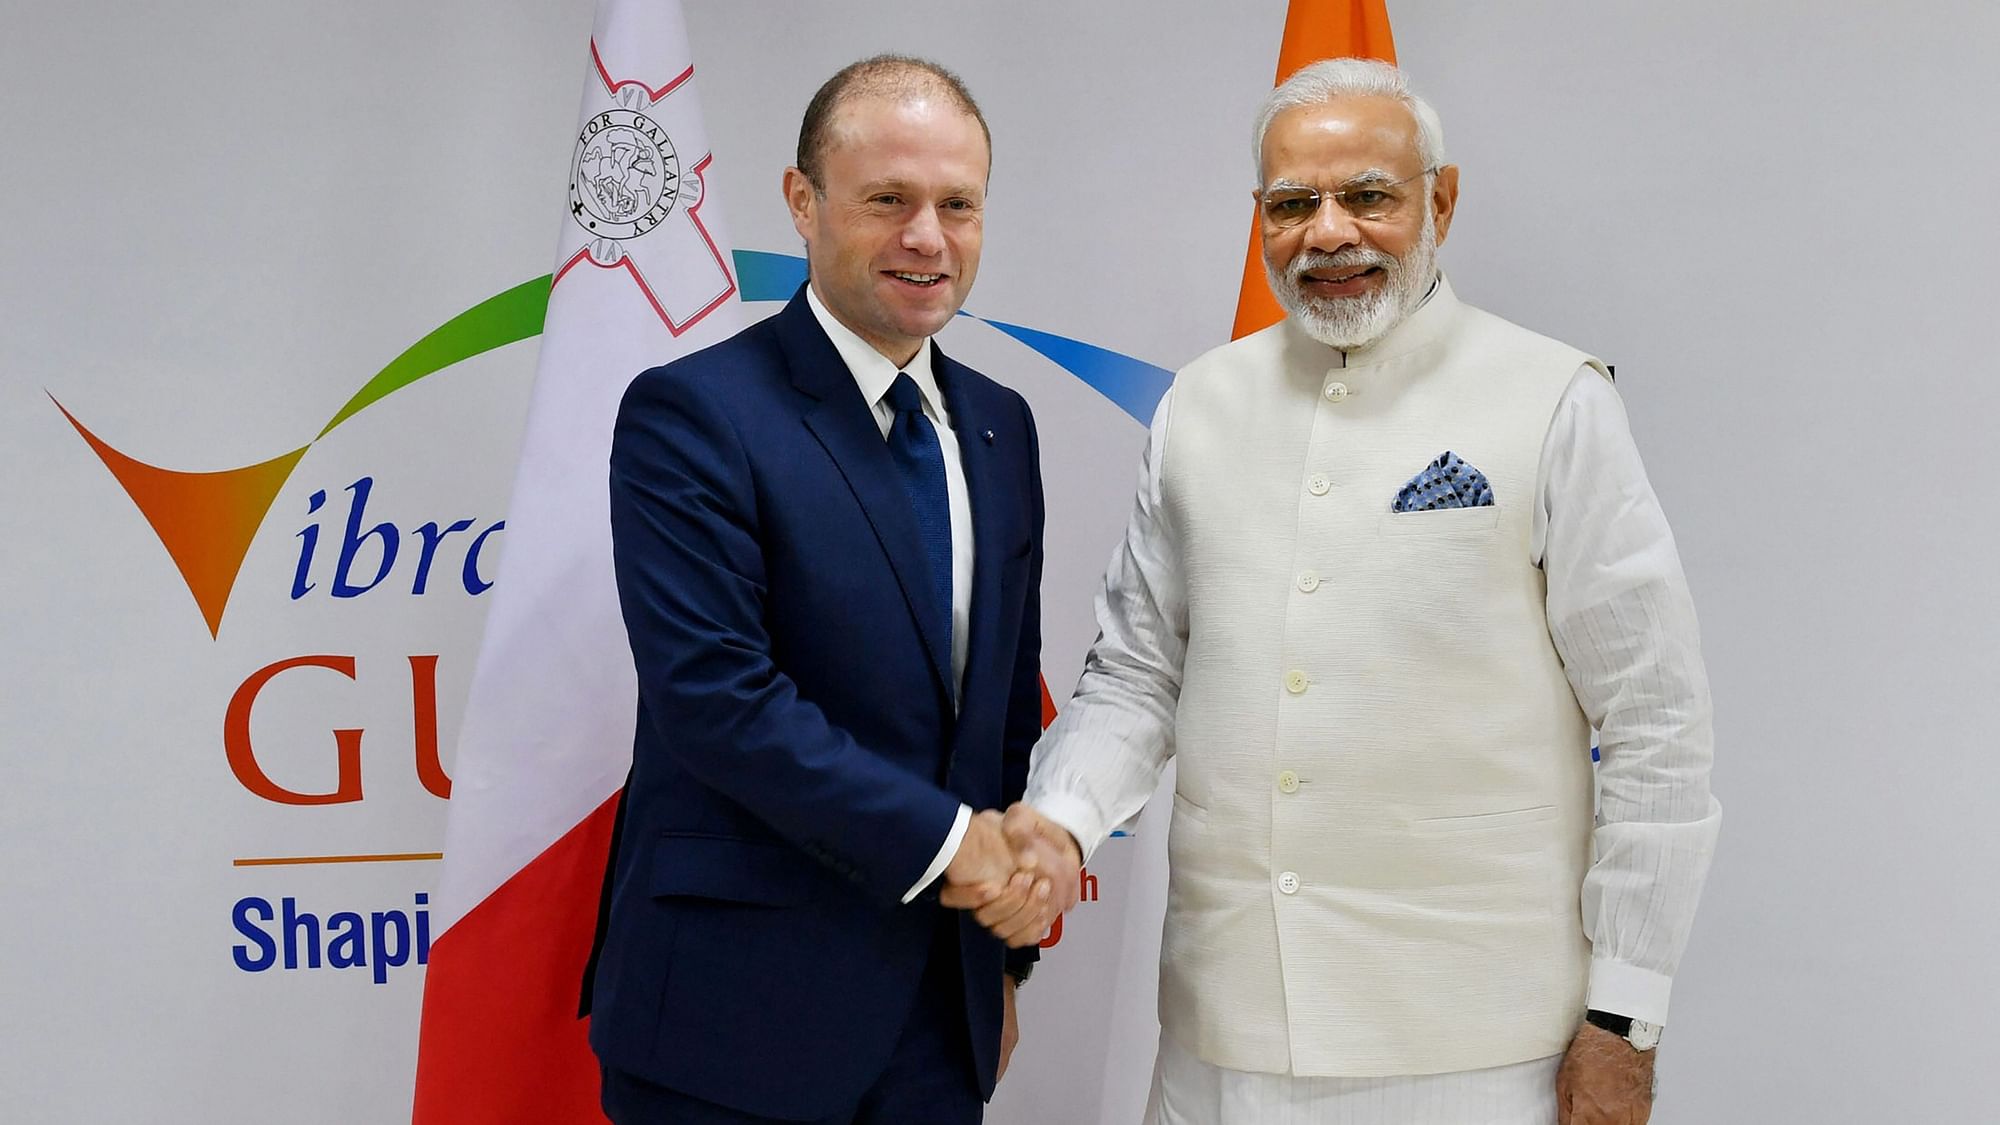  Prime Minister Narendra Modi shakes hands with his Maltese counterpart Joseph Muscat on the sidelines of Vibrant Gujarat in Gandhinagar on Friday.&nbsp;